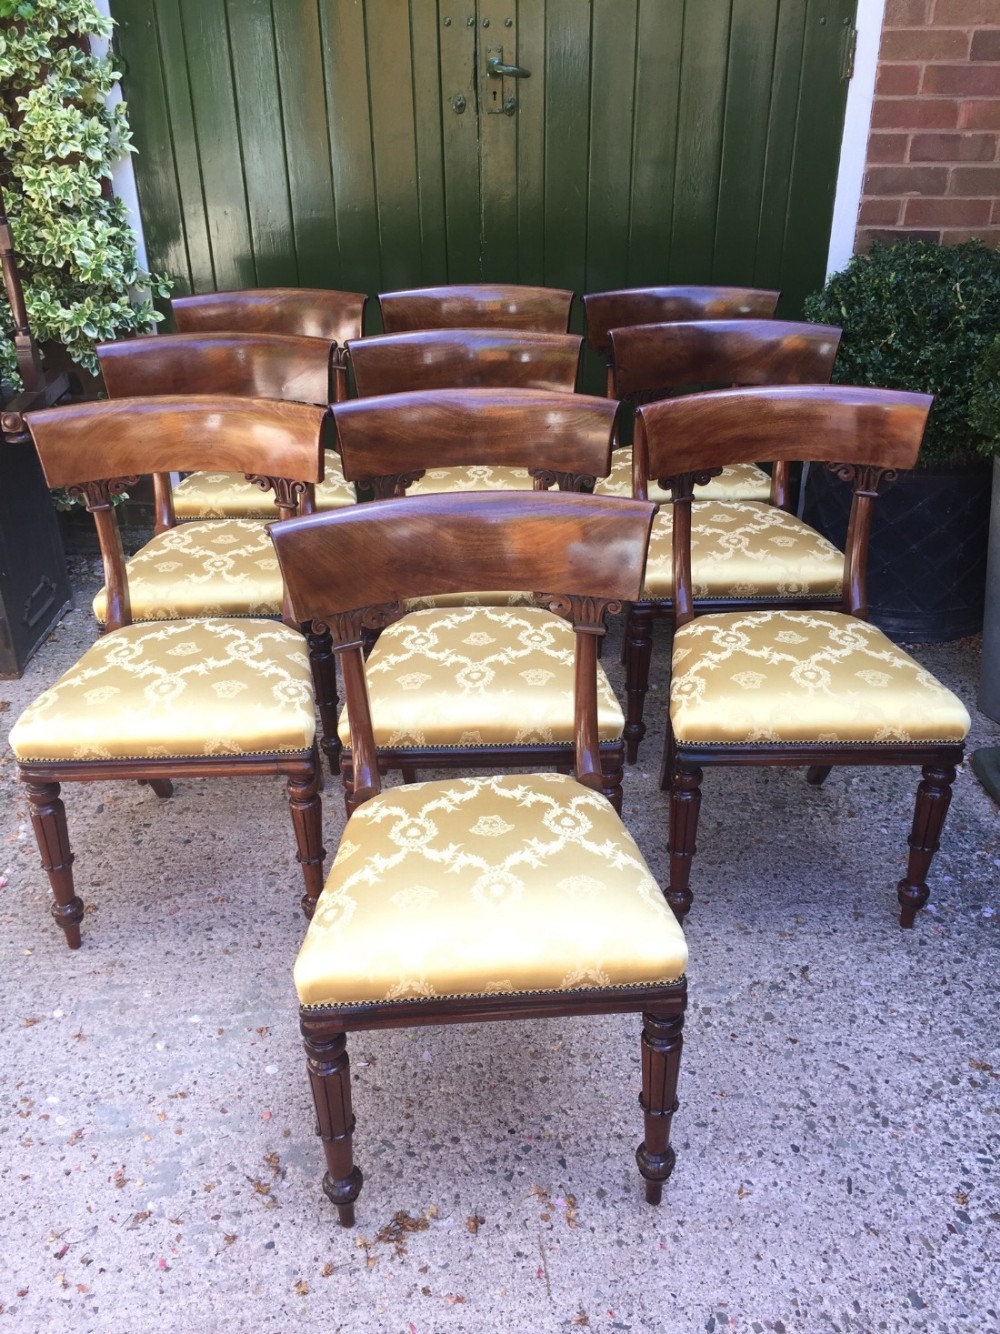 superb set of 10 c19th william iv period mahogany dining chairs